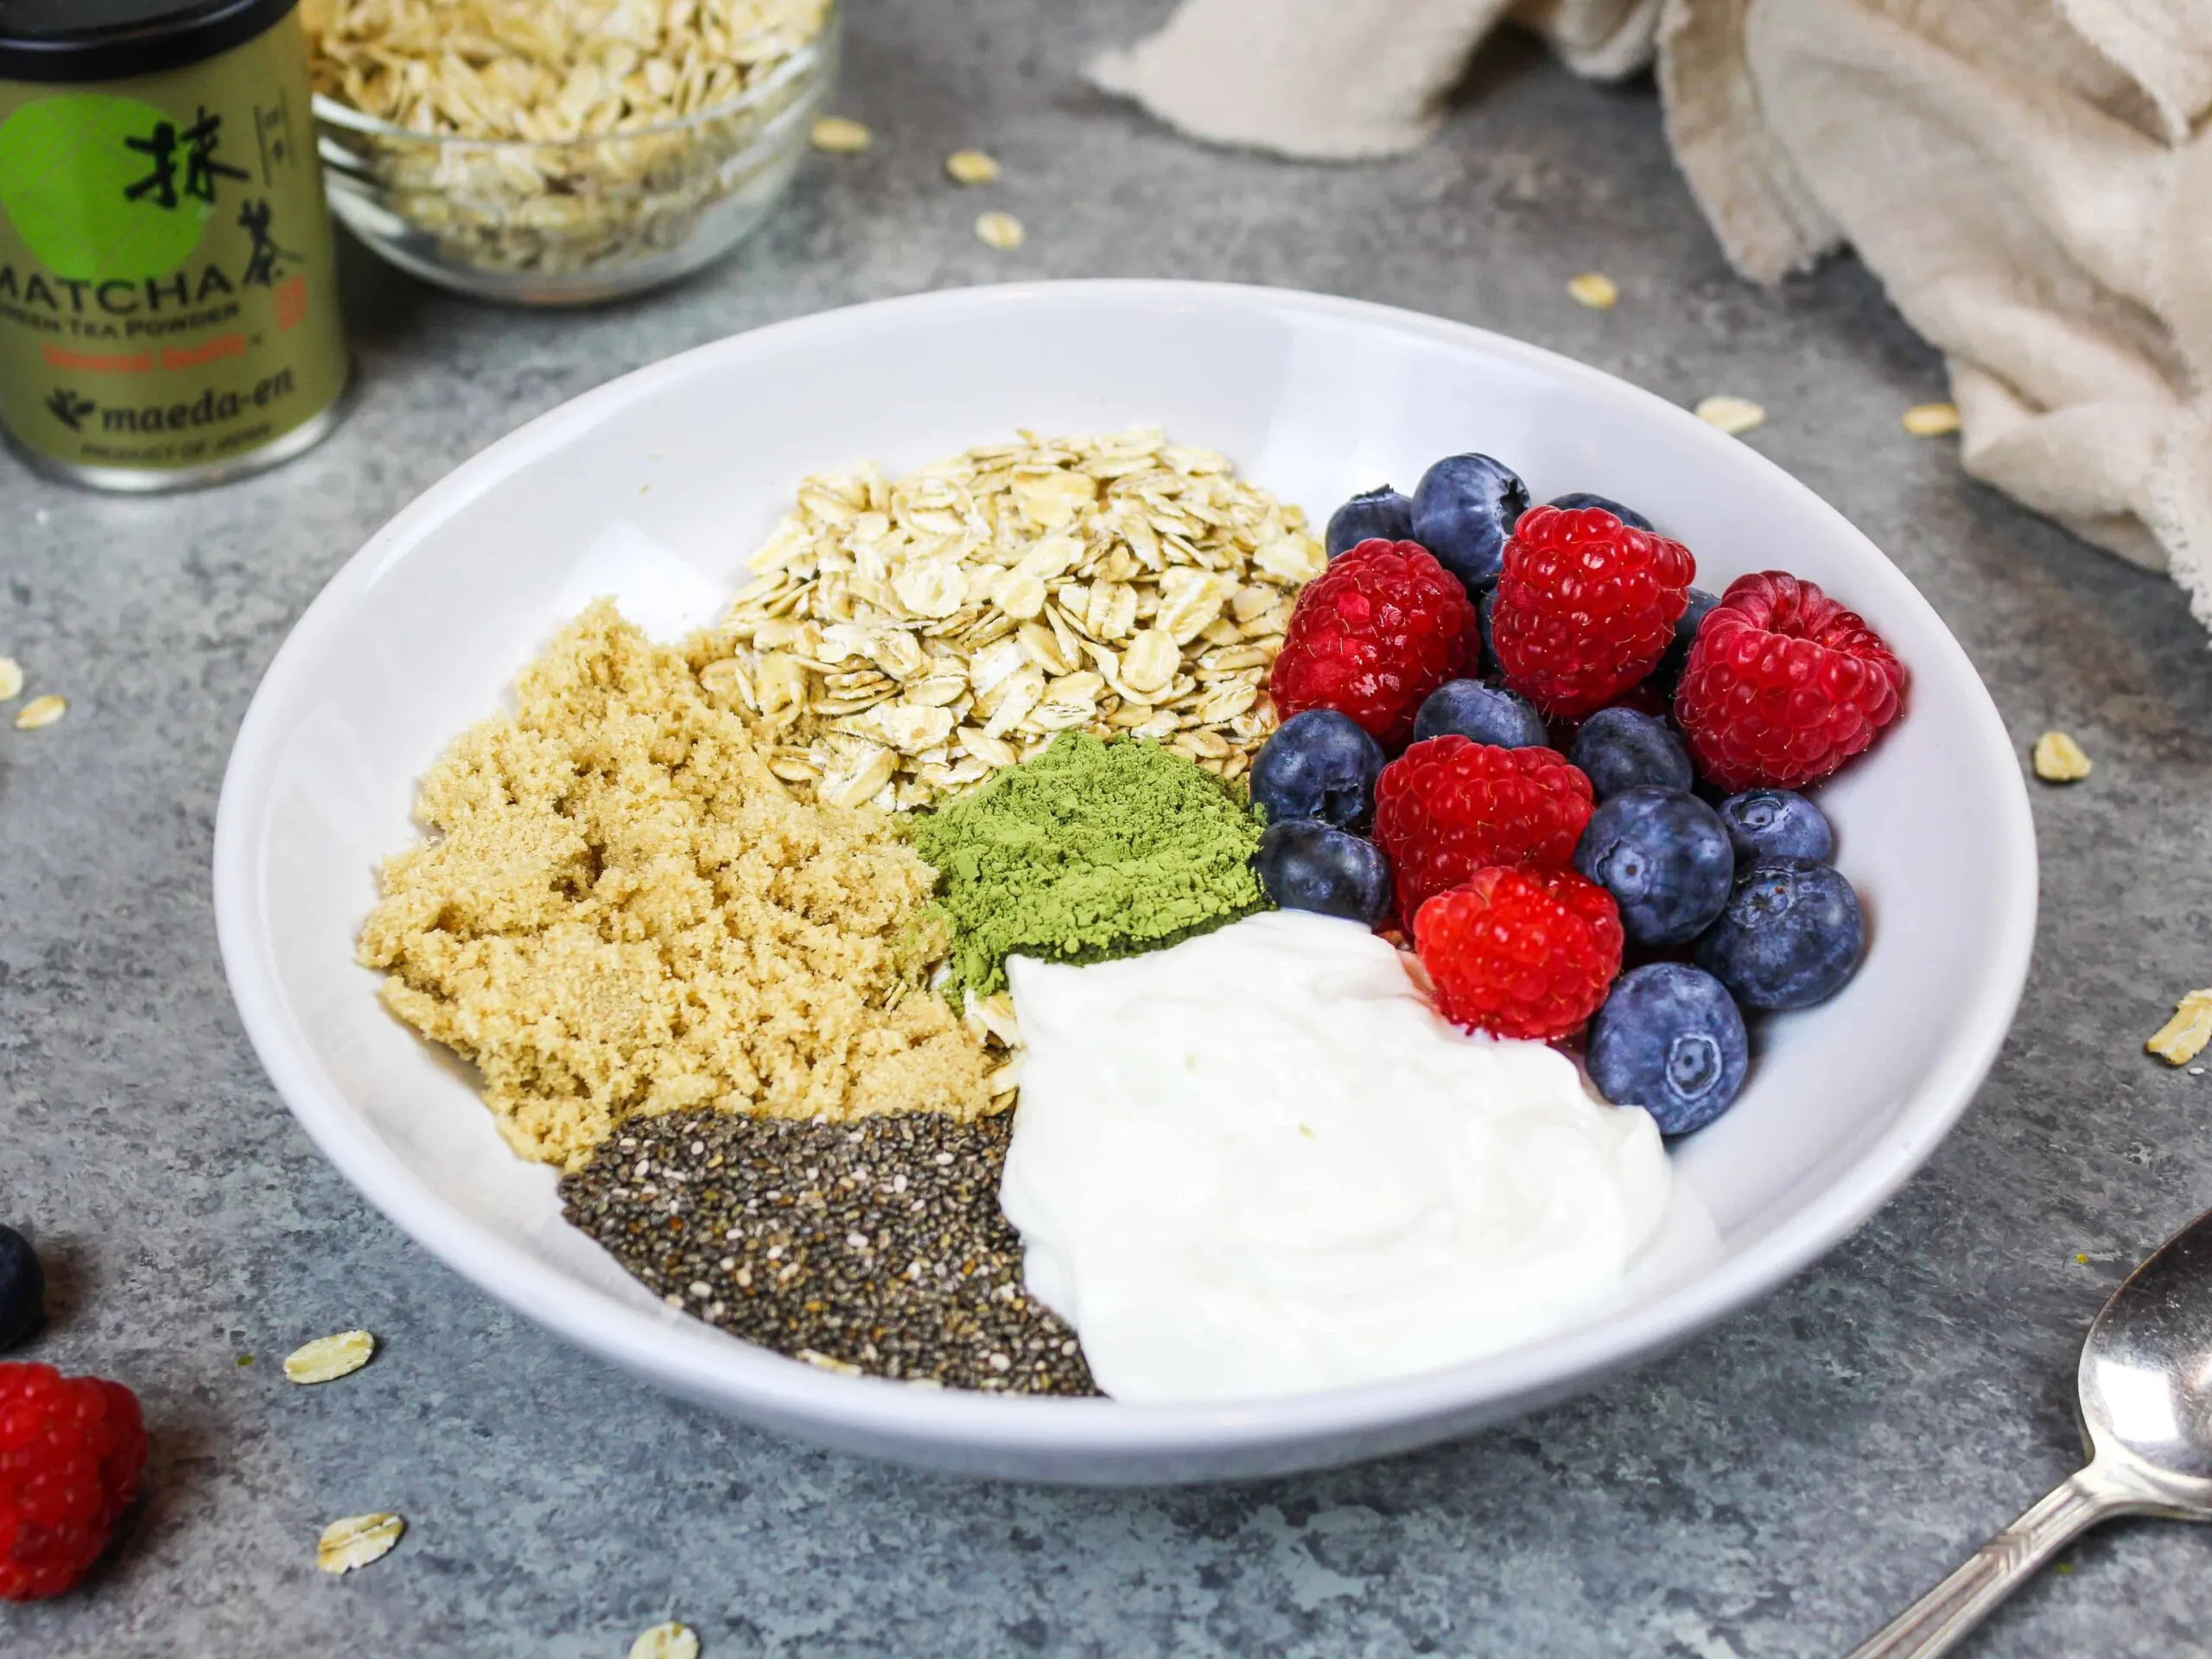 image of ingredients in a bowl to make overnight oats with chia seeds, greek yogurt, brown sugar, berries, honey and old fashioned oats